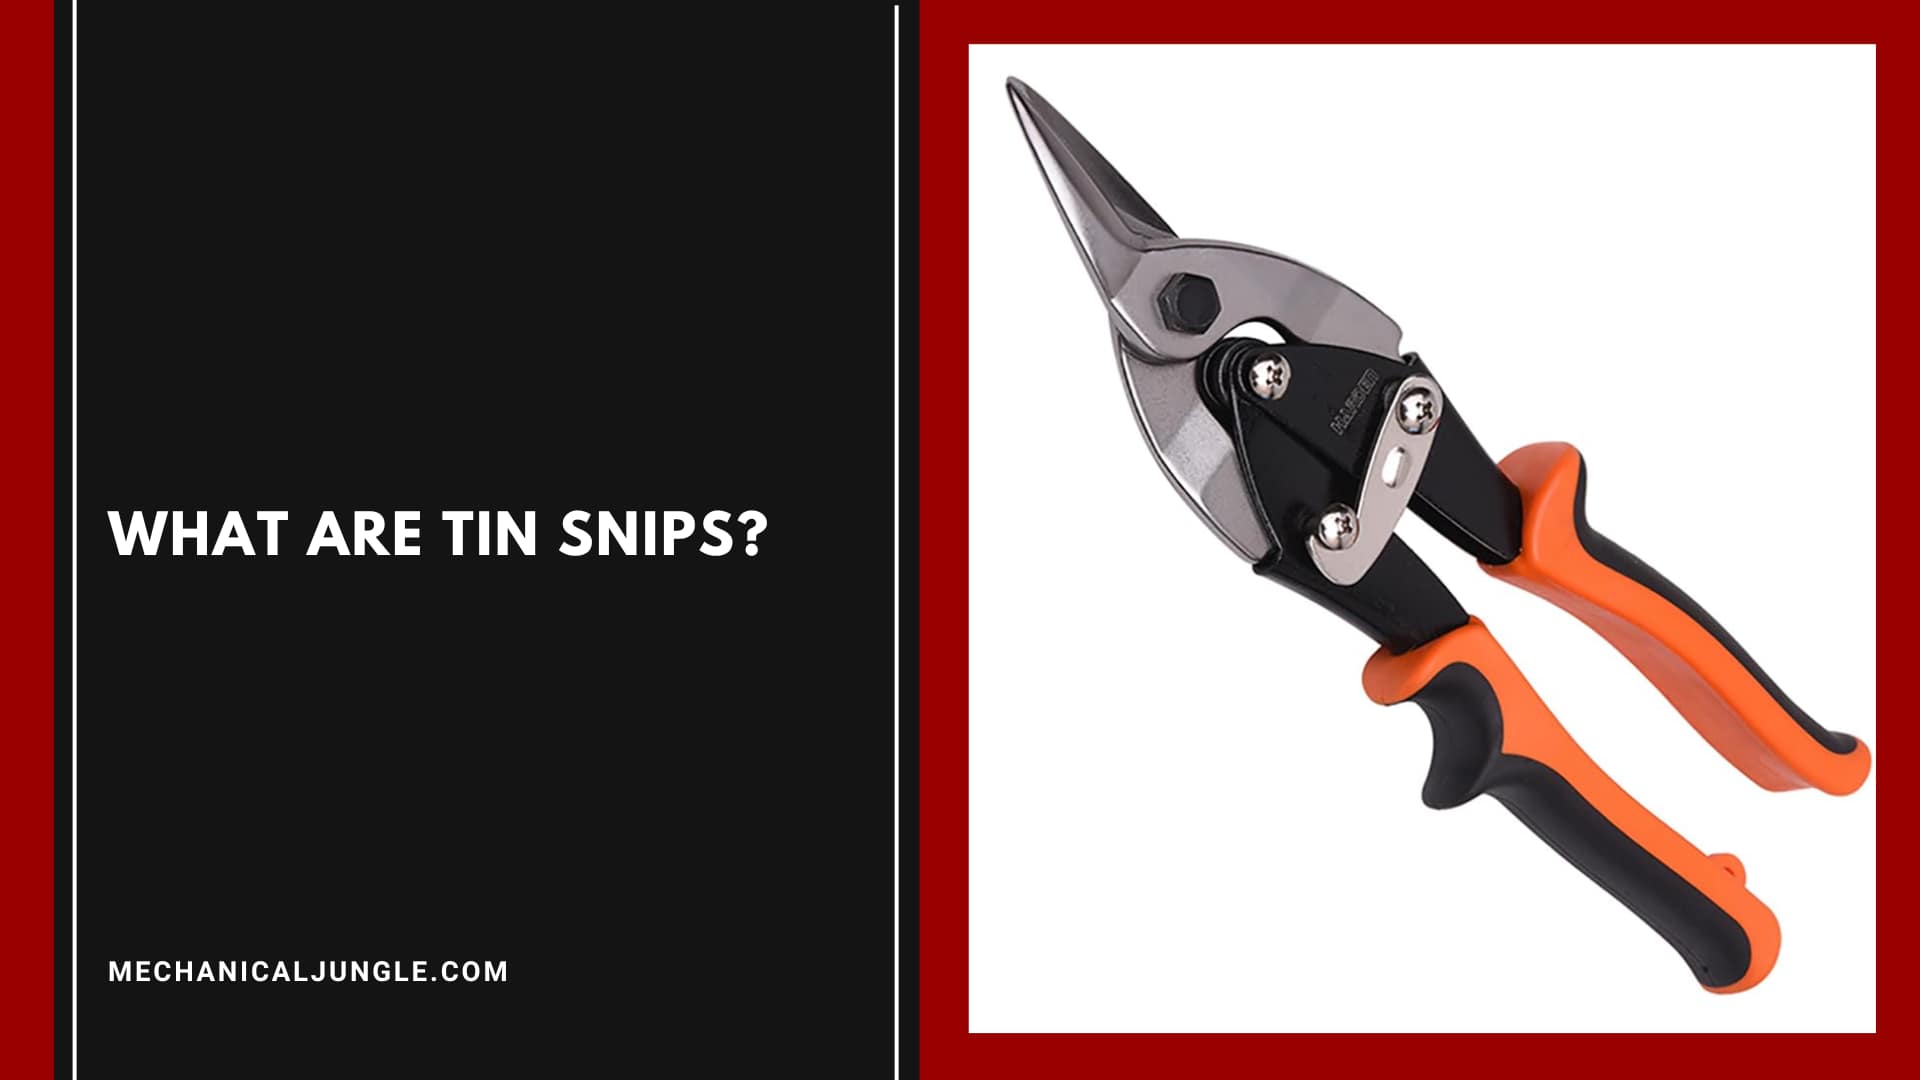 What Are Tin Snips?